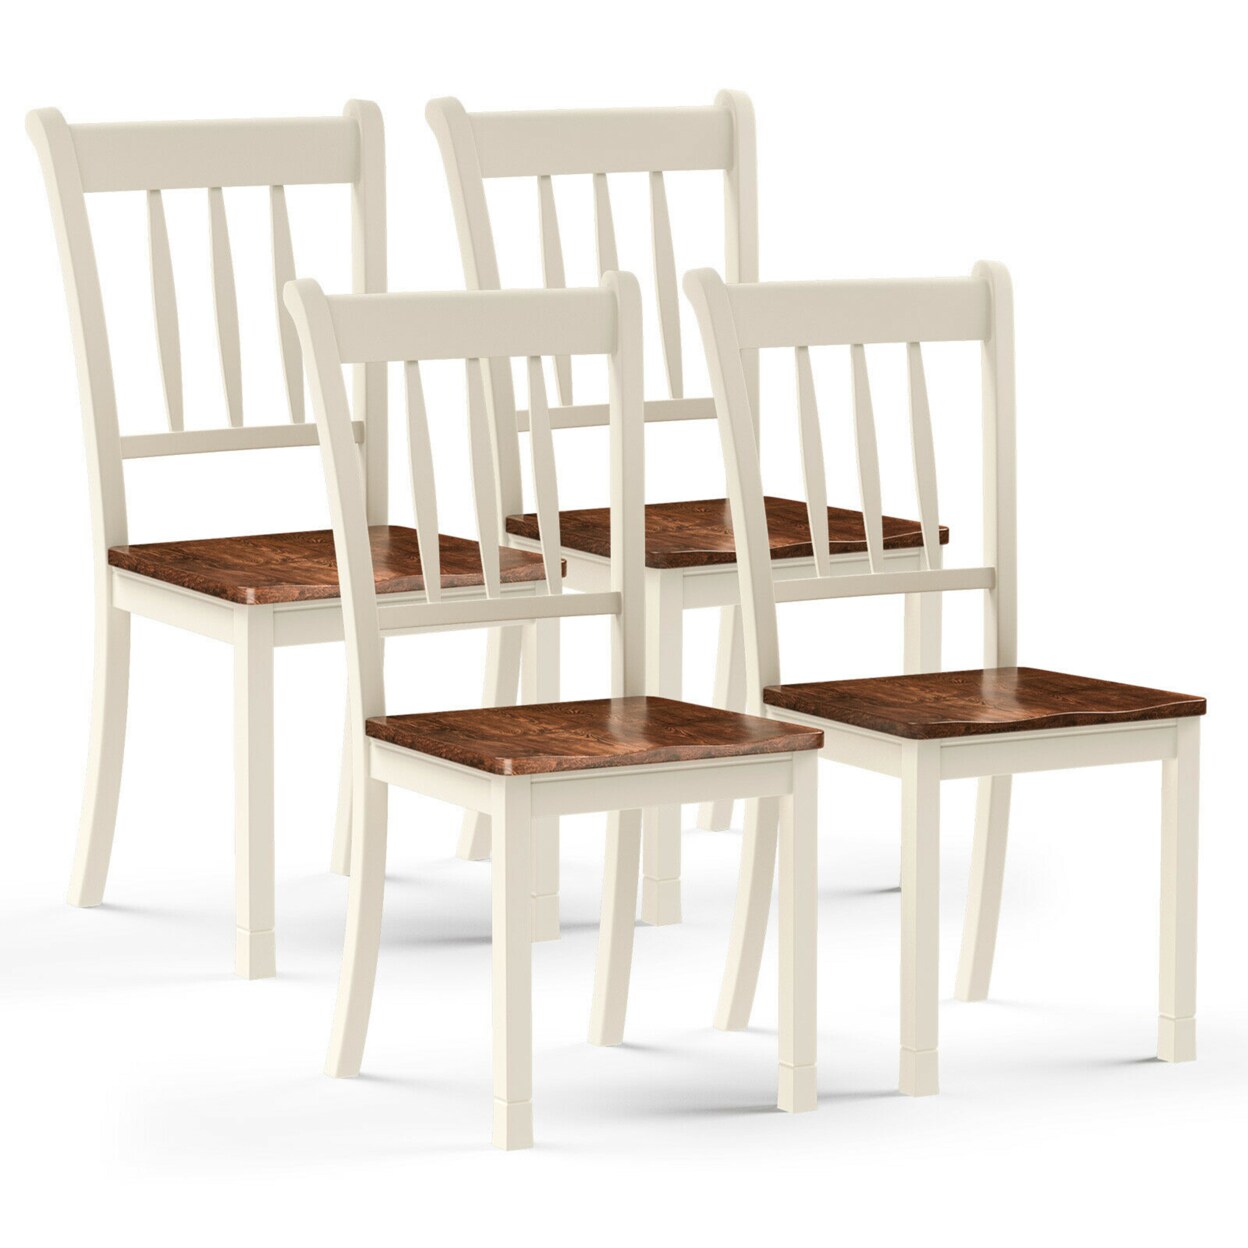 Gymax 4PCS Wooden Dining Side Chair High Back Armless Home Furniture White